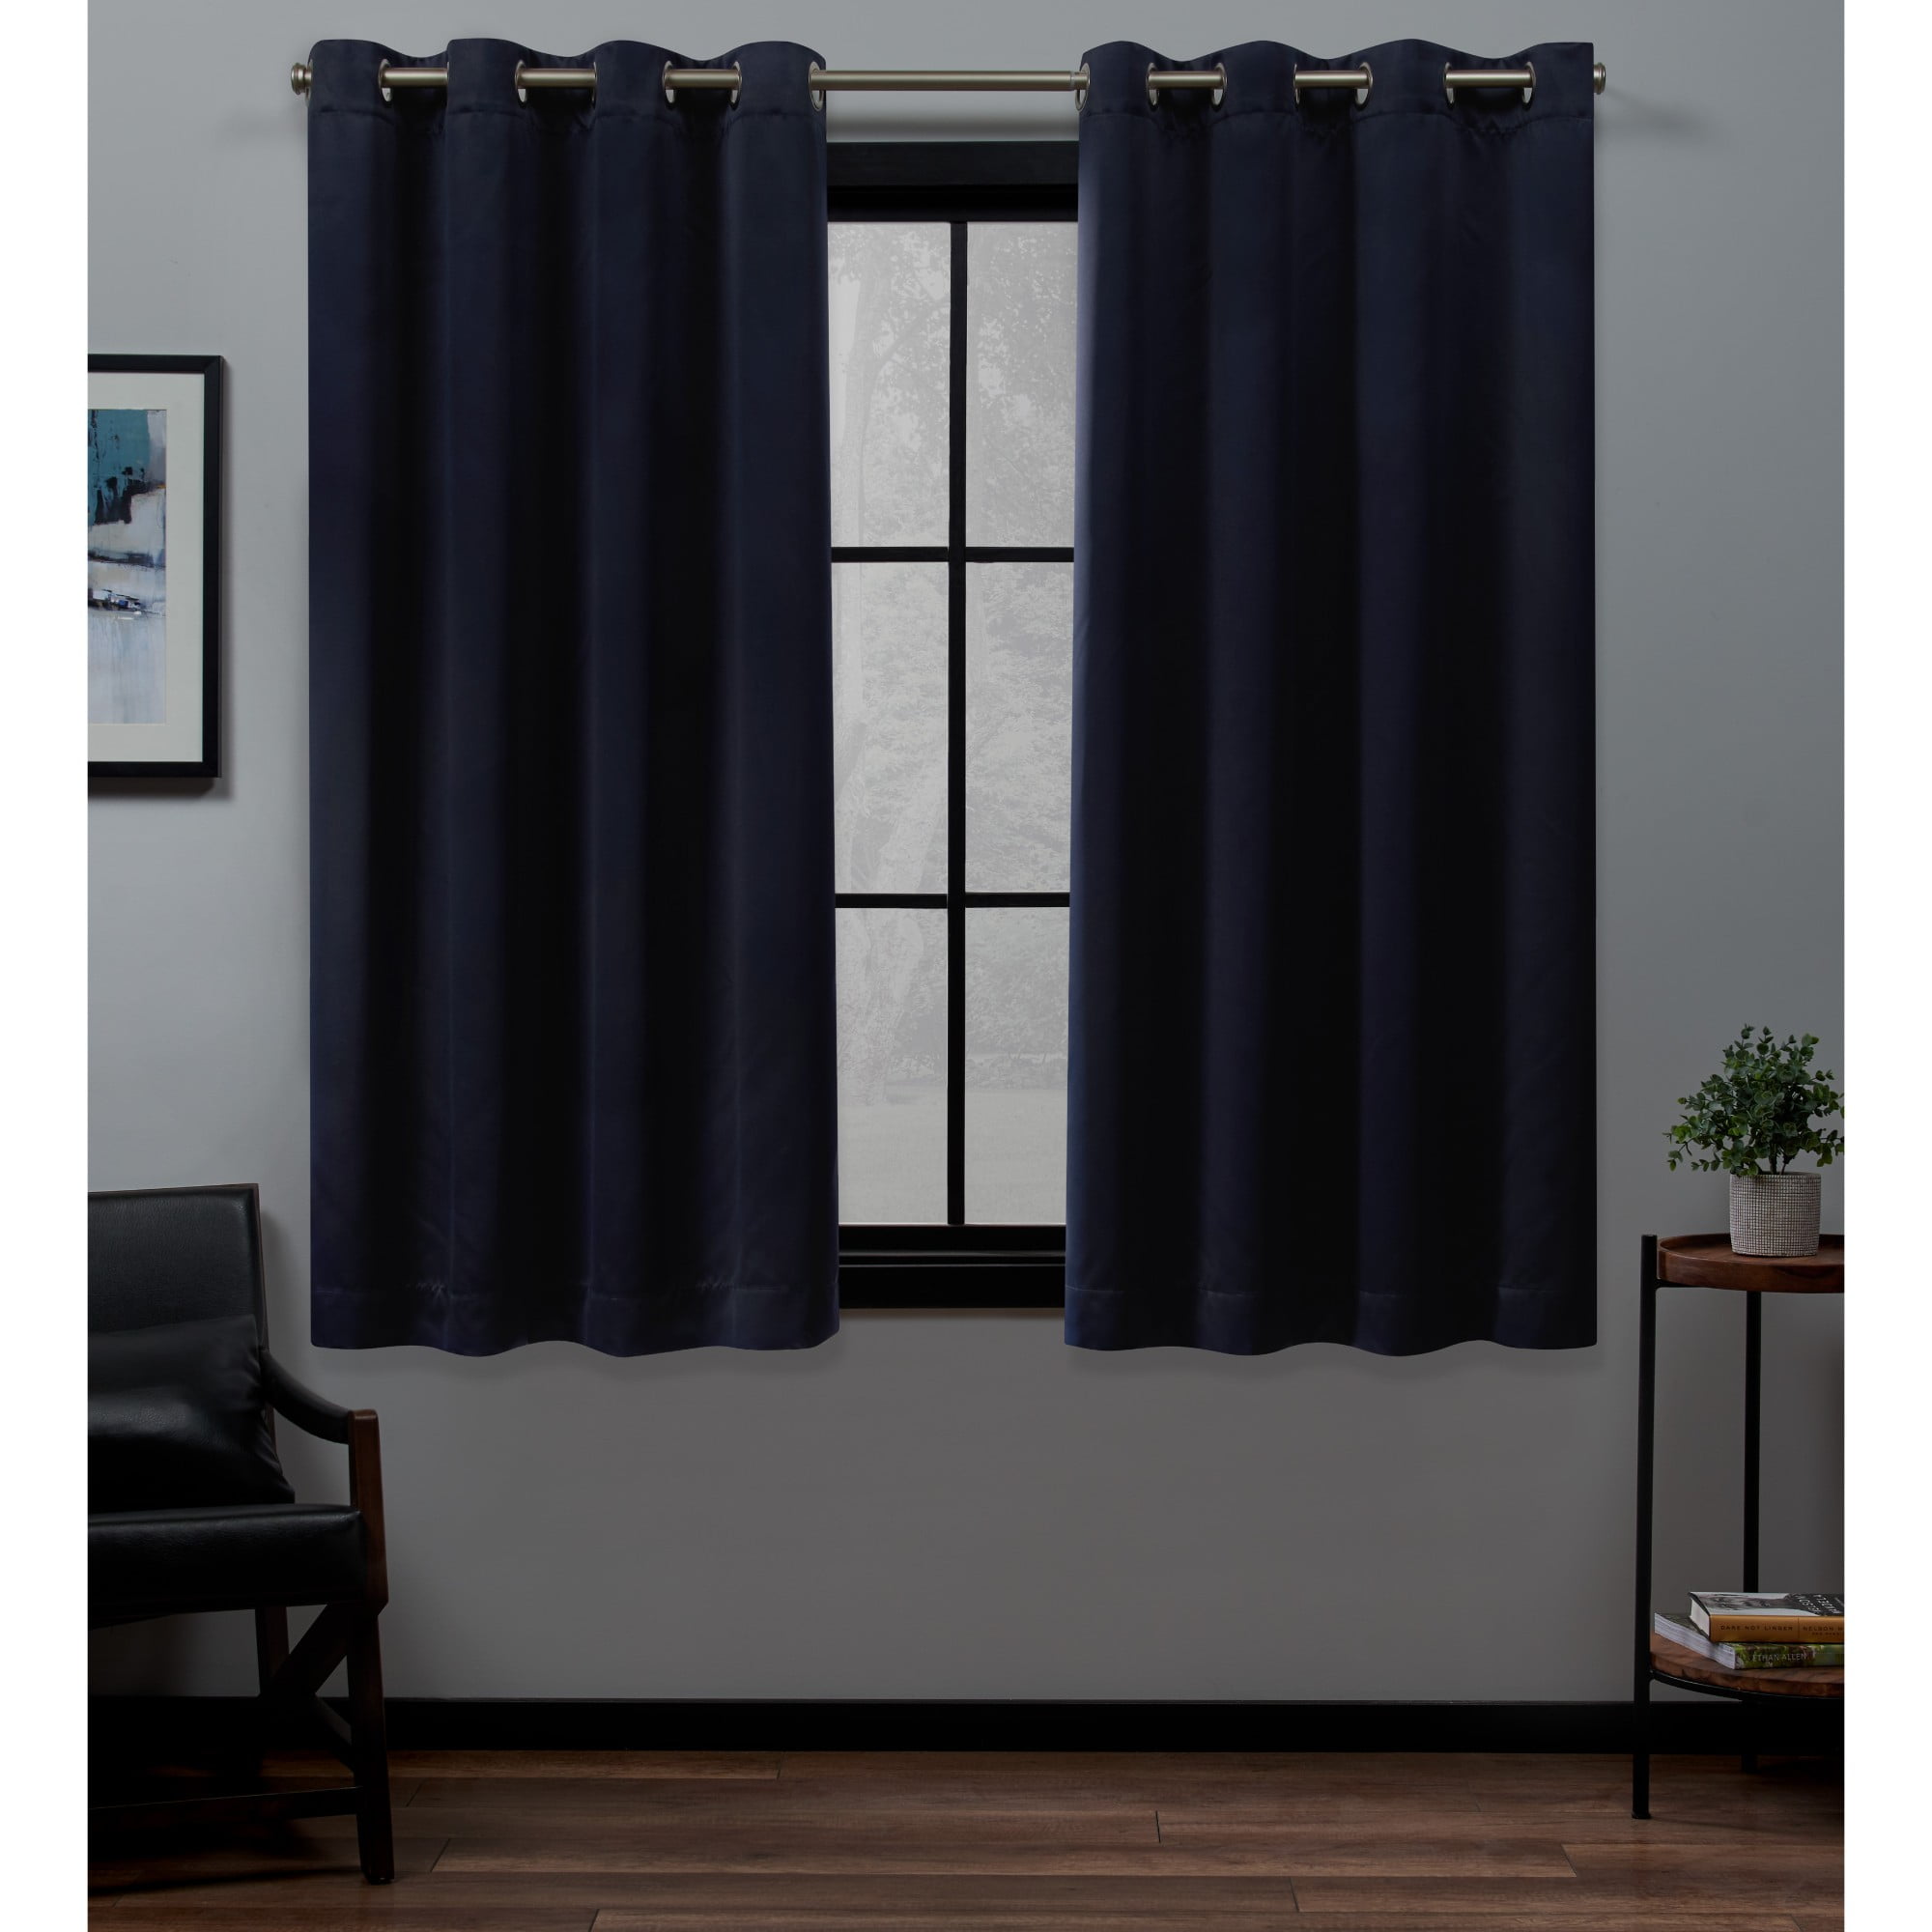 2pc Home Curtains Solid Linen Feel Wide Window Curtain Panel Pair with Grommets 